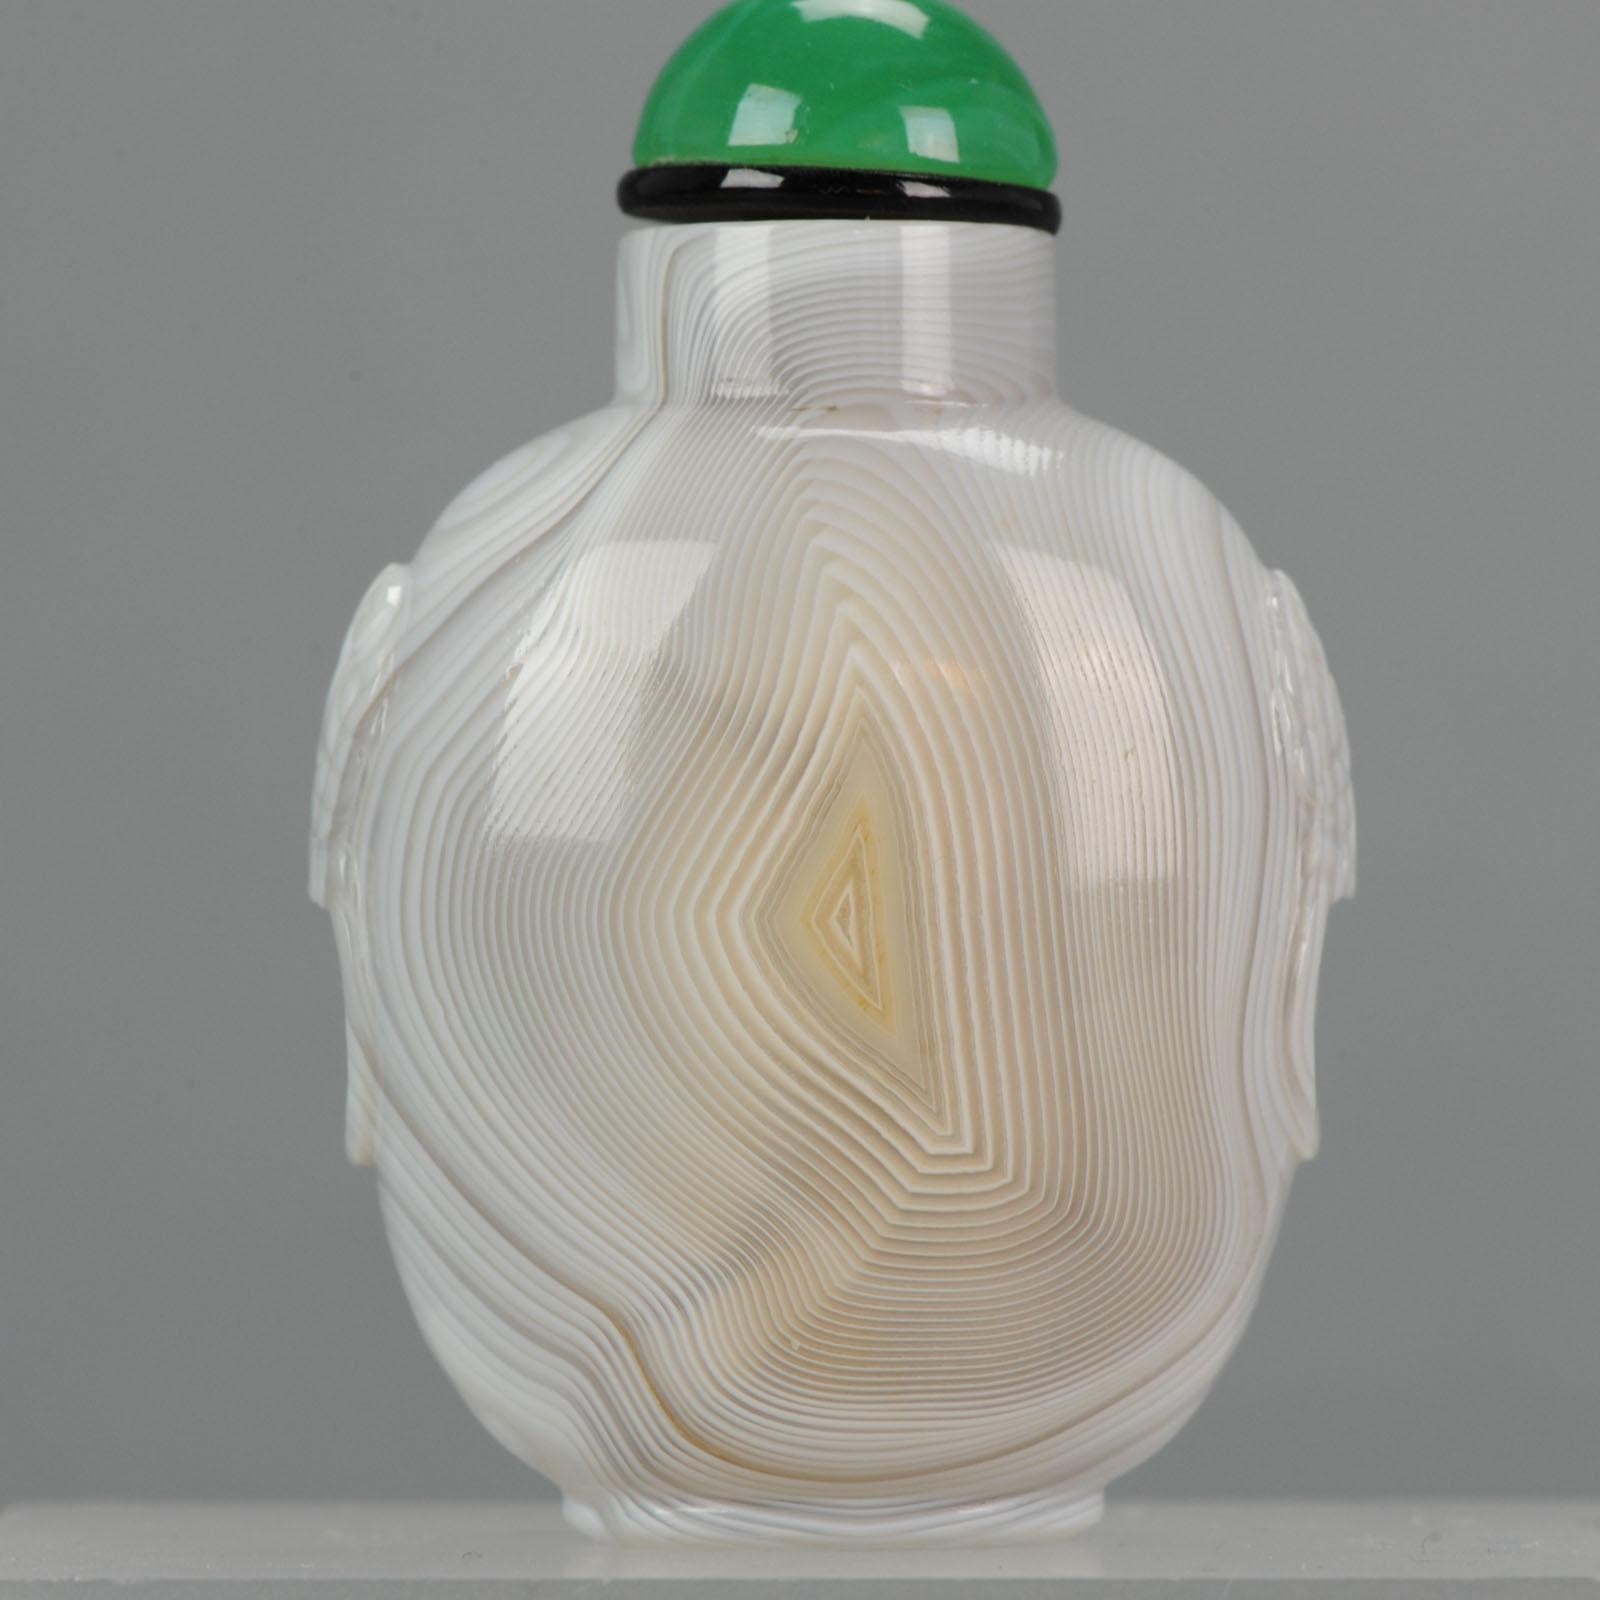 Antique Chinese Snuff Bottle Agate Thumbprint Qing Dynasty, 18th-19th Century 1